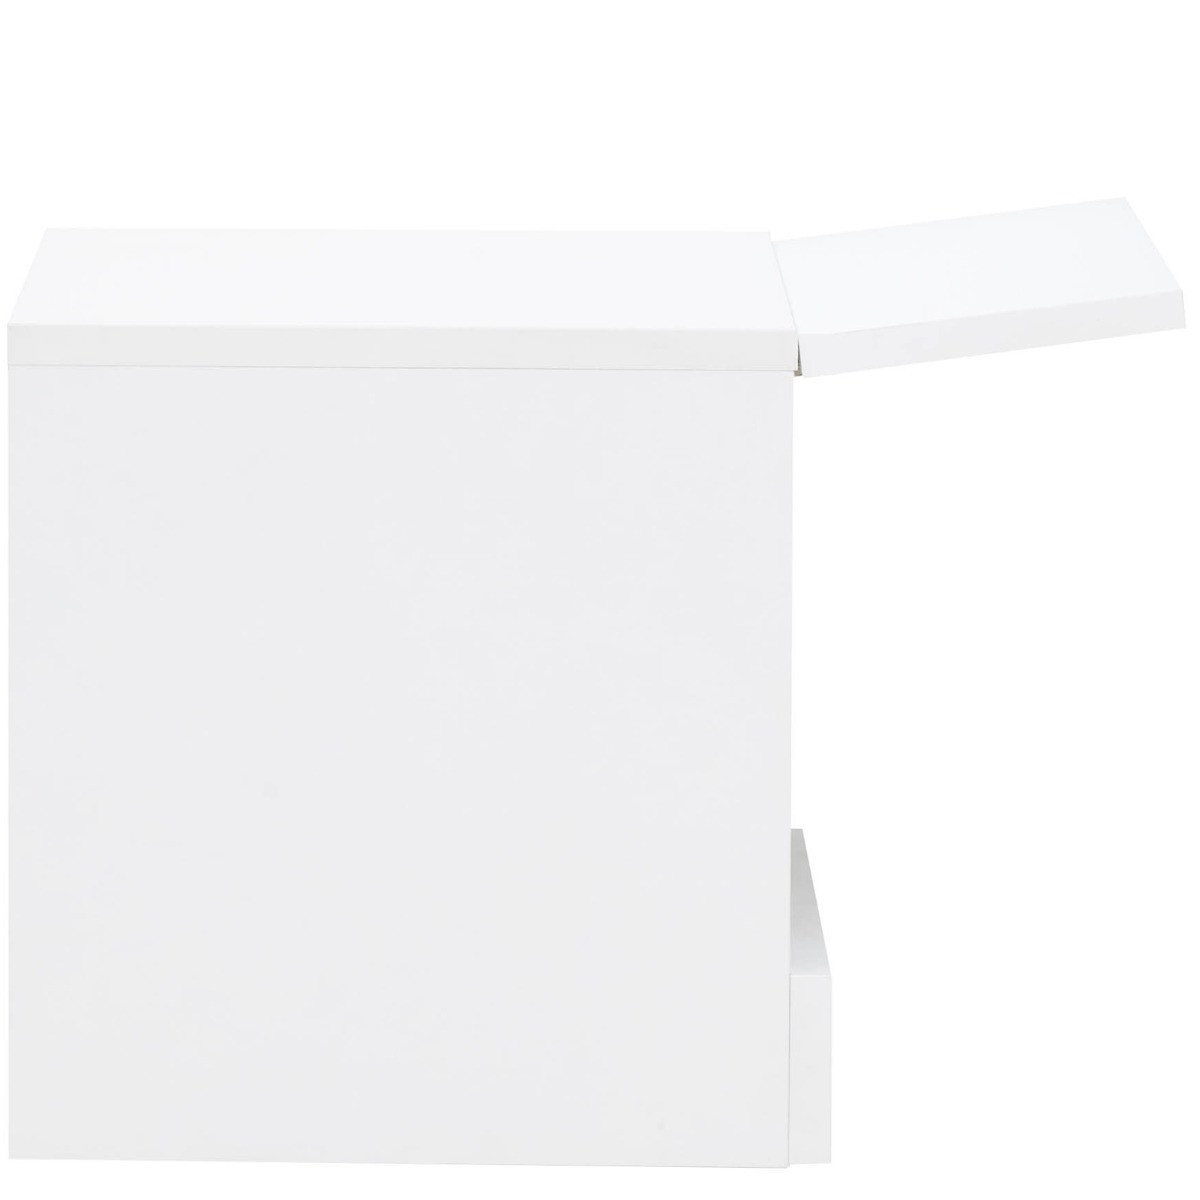 Galicia Pair Of Wall Hanging Bedside Tables - White>